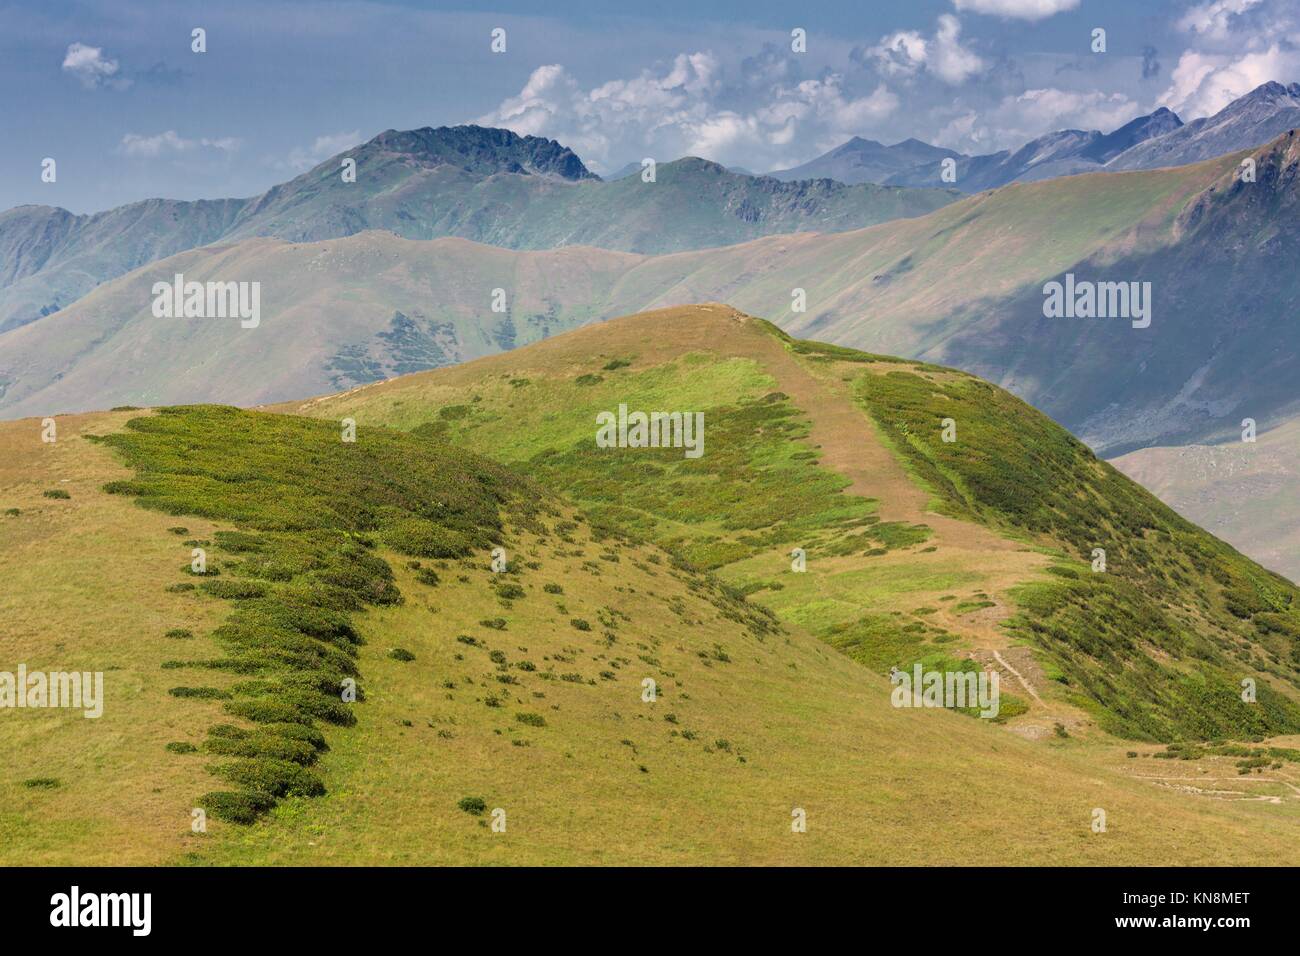 Beautiful landscape with green hills and mountais. Stock Photo